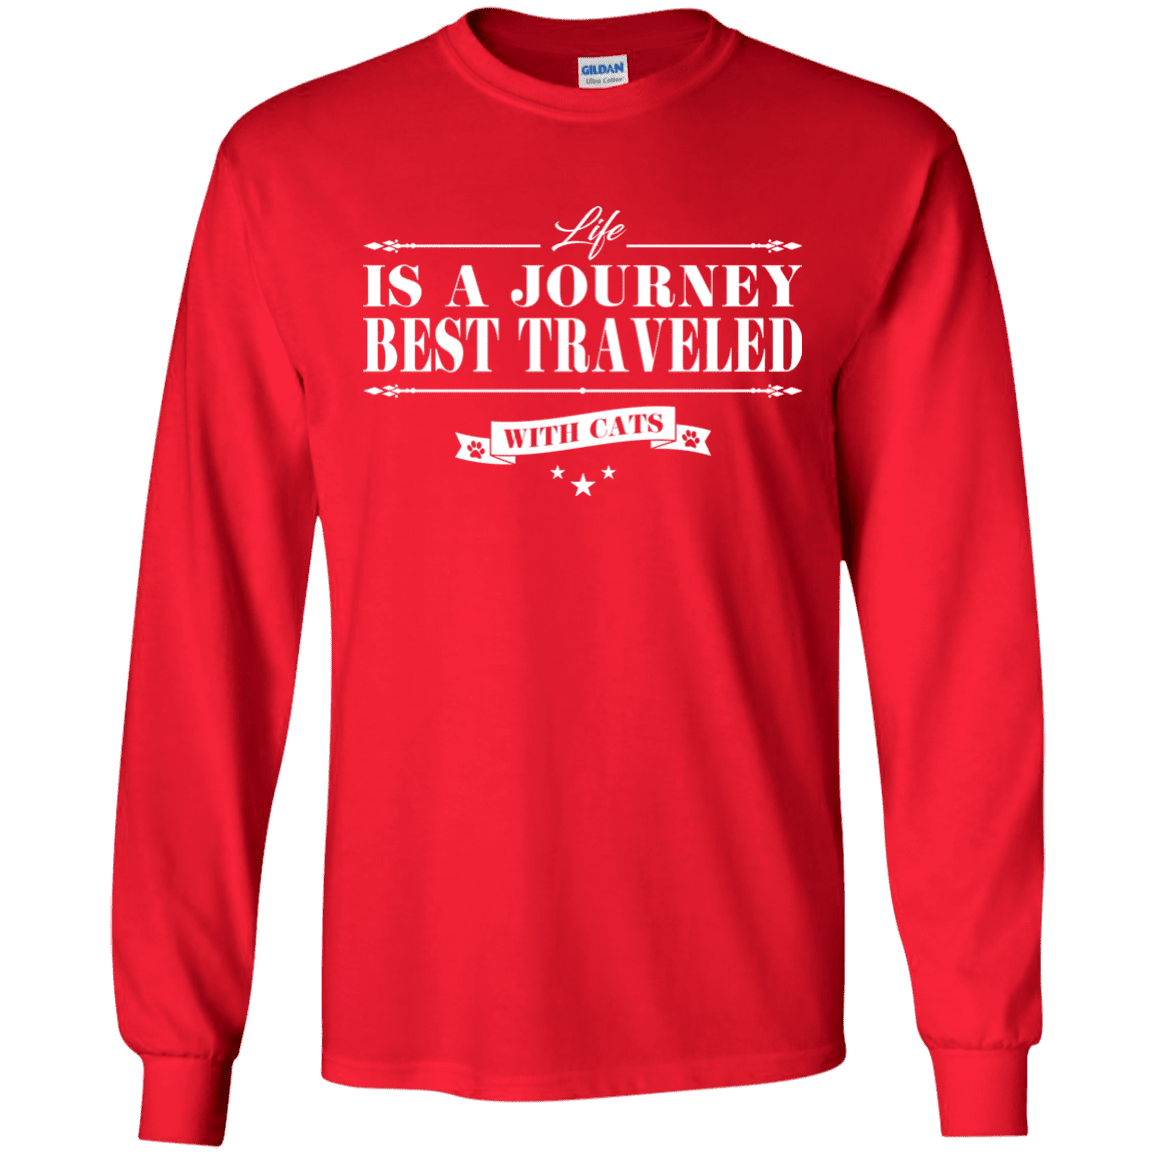 Life Is a Journey Best Travelled With Cats - Long Sleeve  T Shirt.